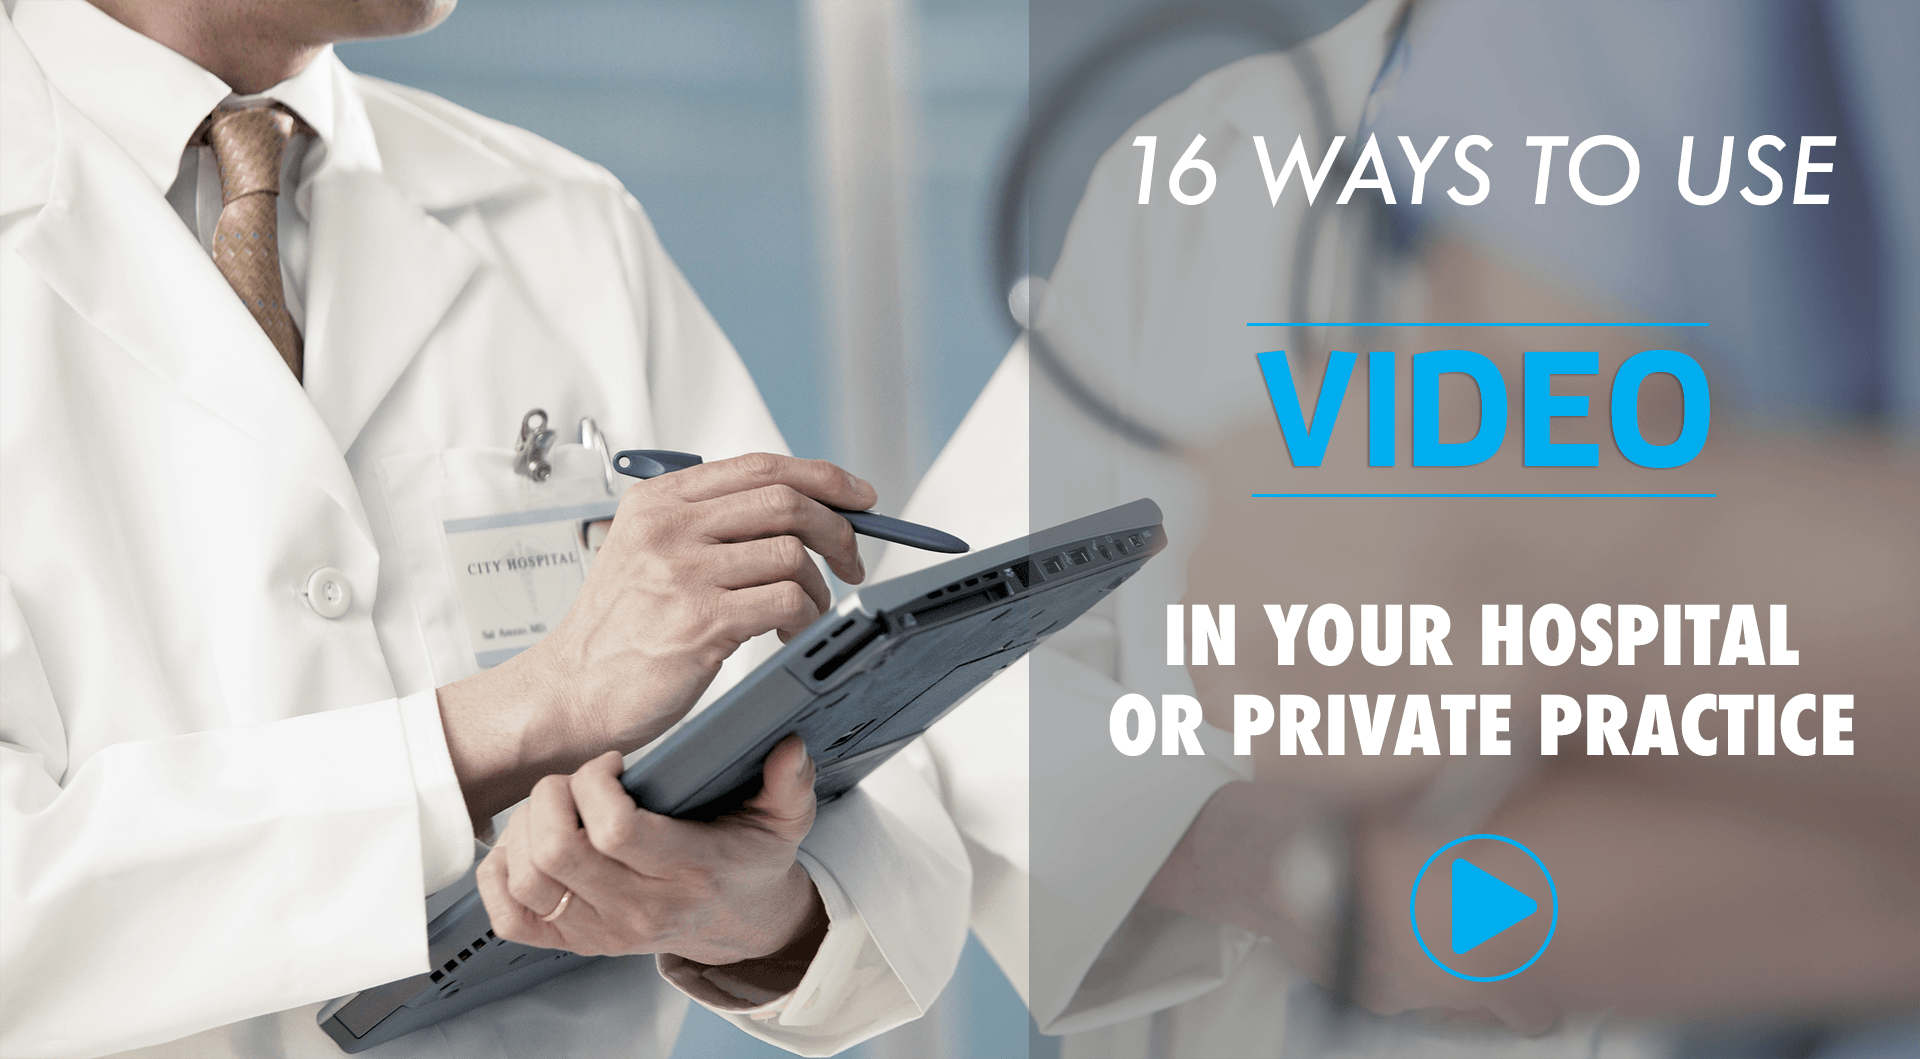 Healthcare Marketing: 16 Ways to Utilize Video in a Hospital or Private Practice